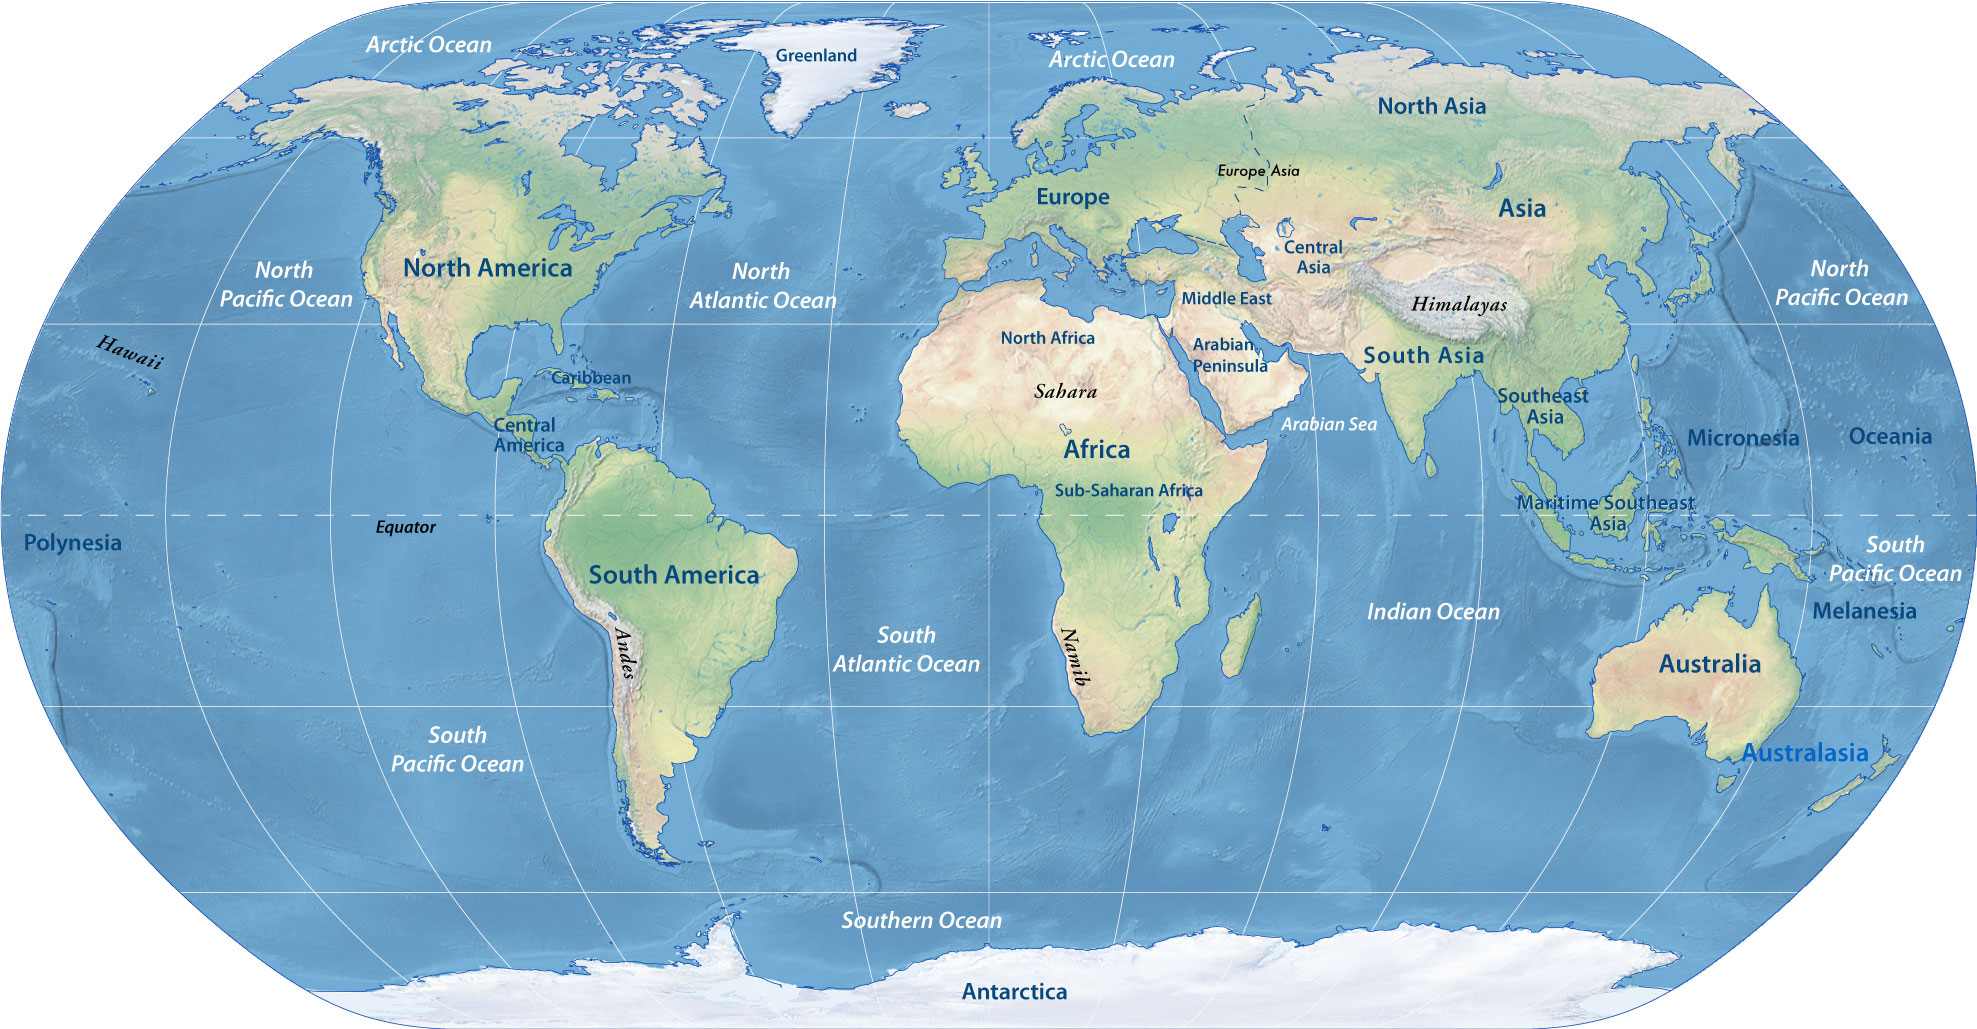 labeled-world-map-with-oceans-and-continents